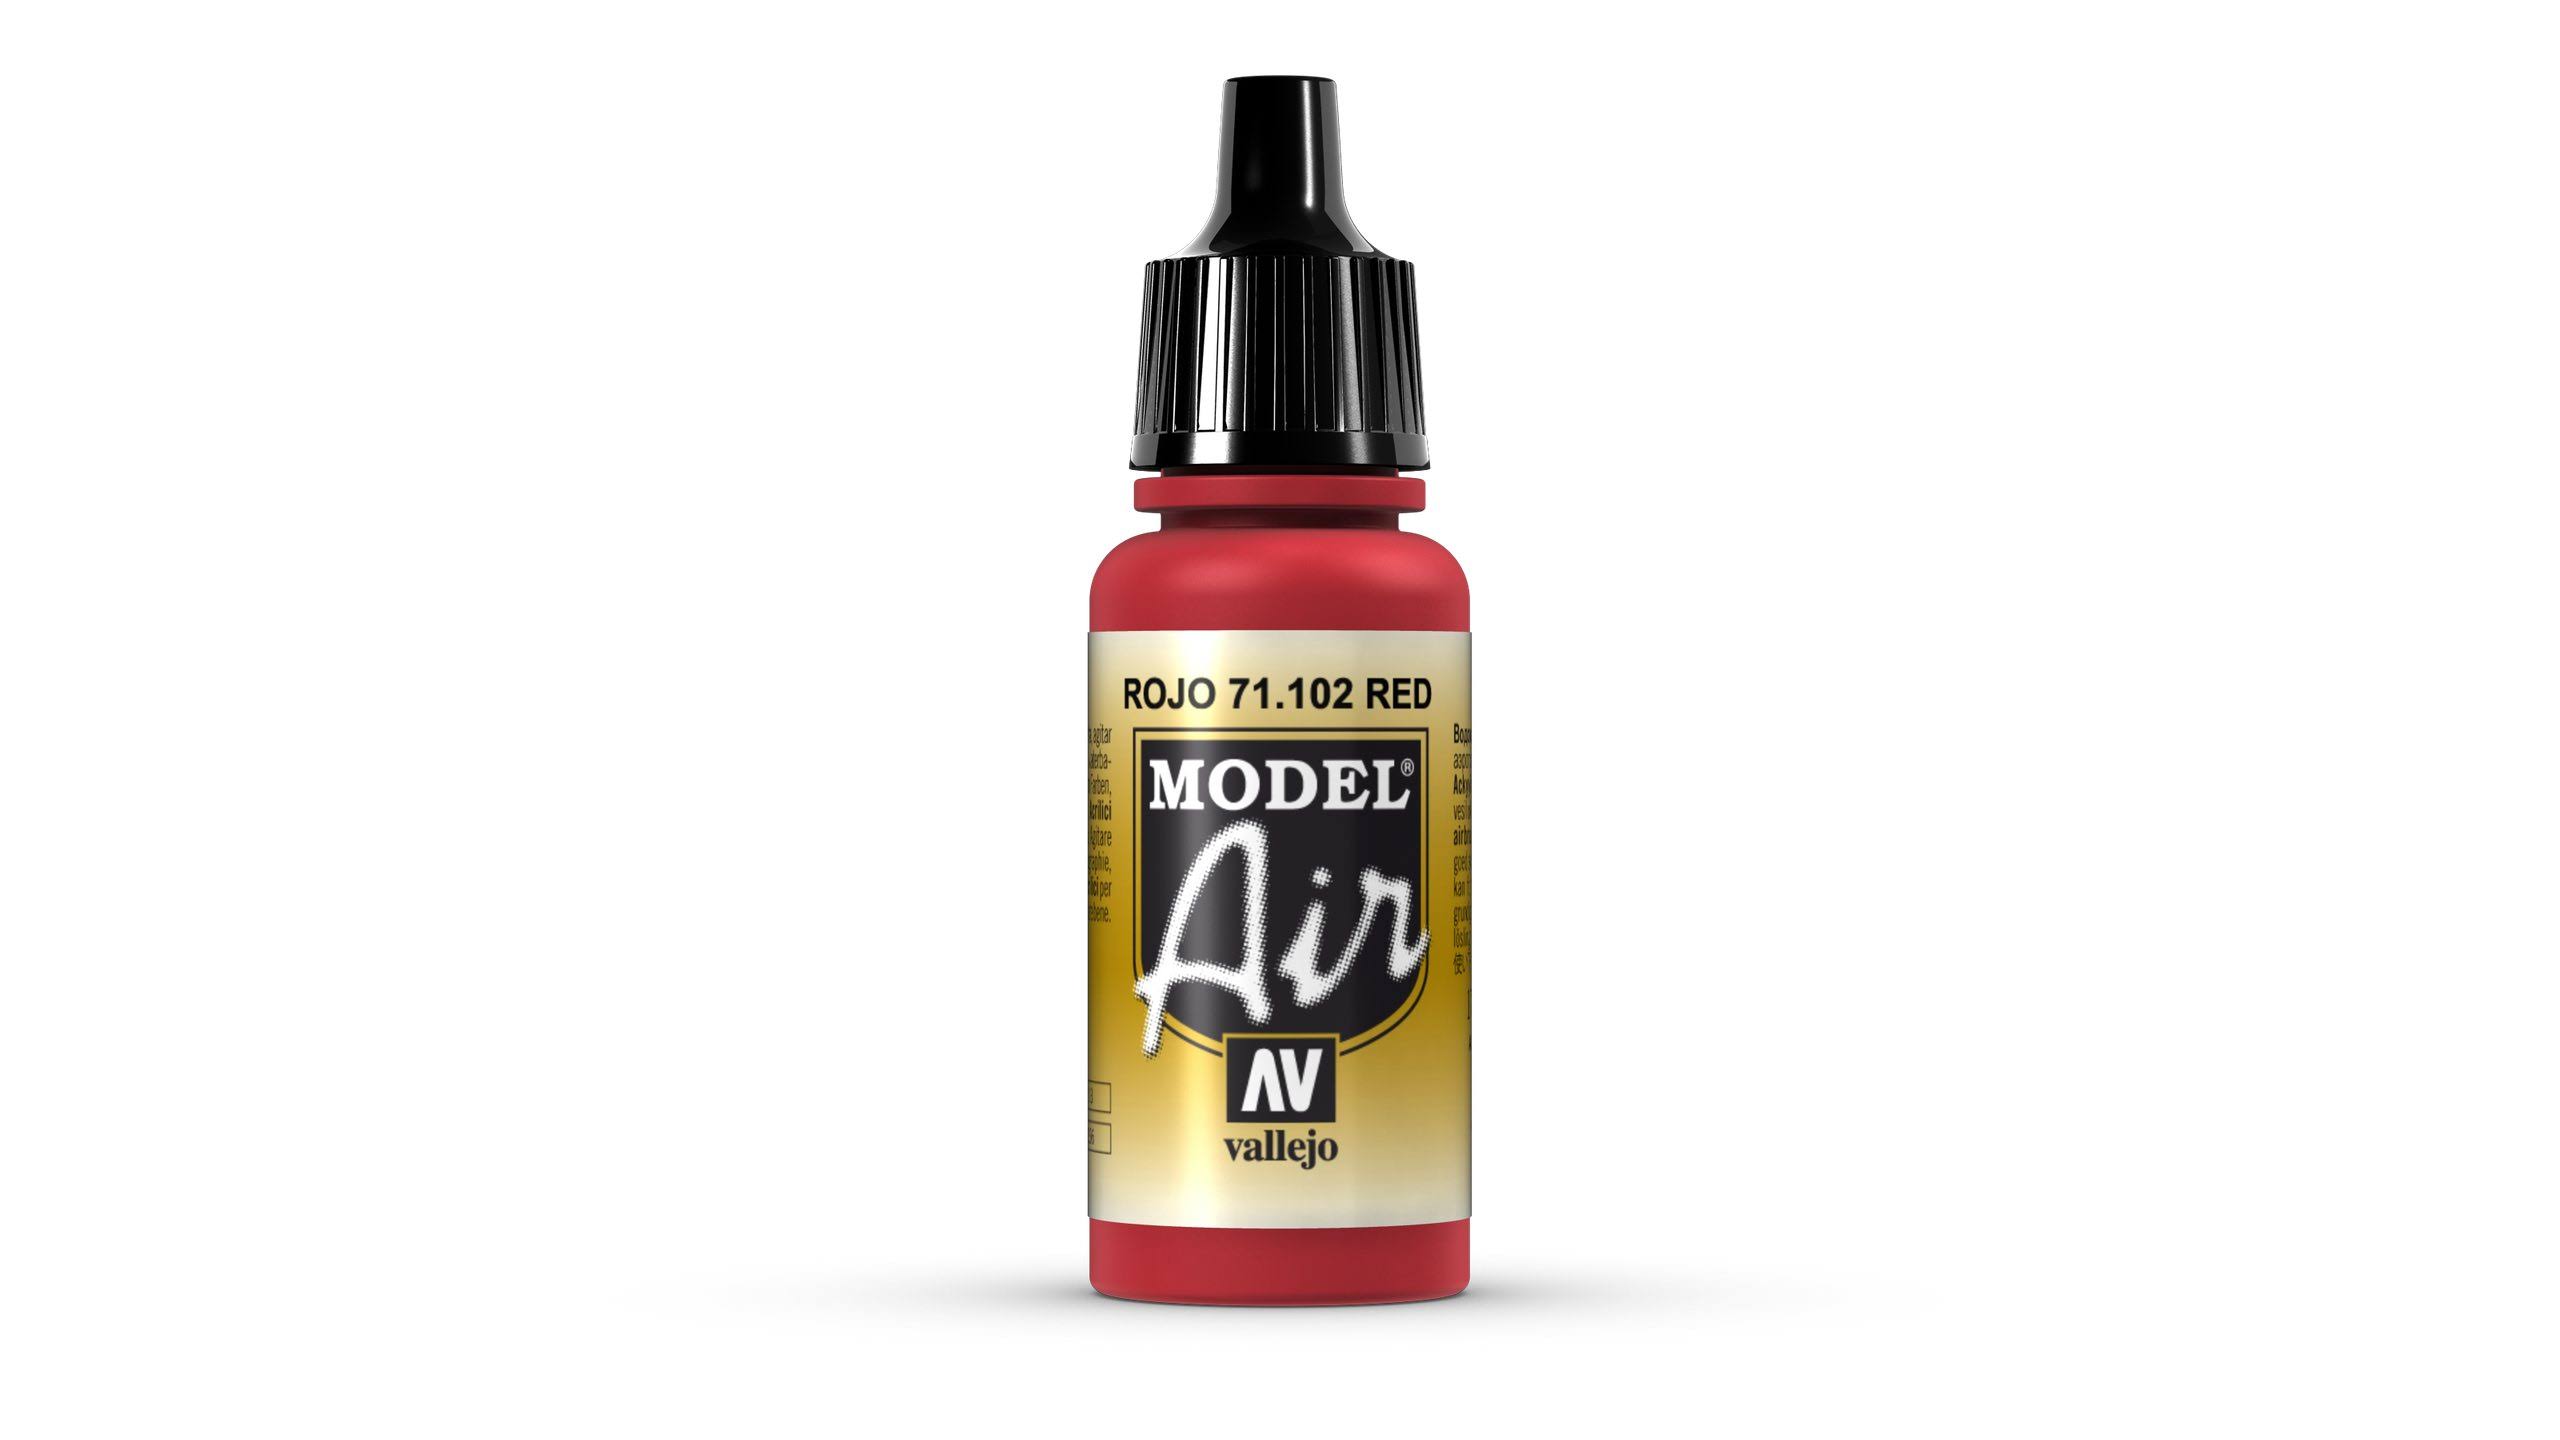 Vallejo Model Air 17 ml Acrylic Paint - Red